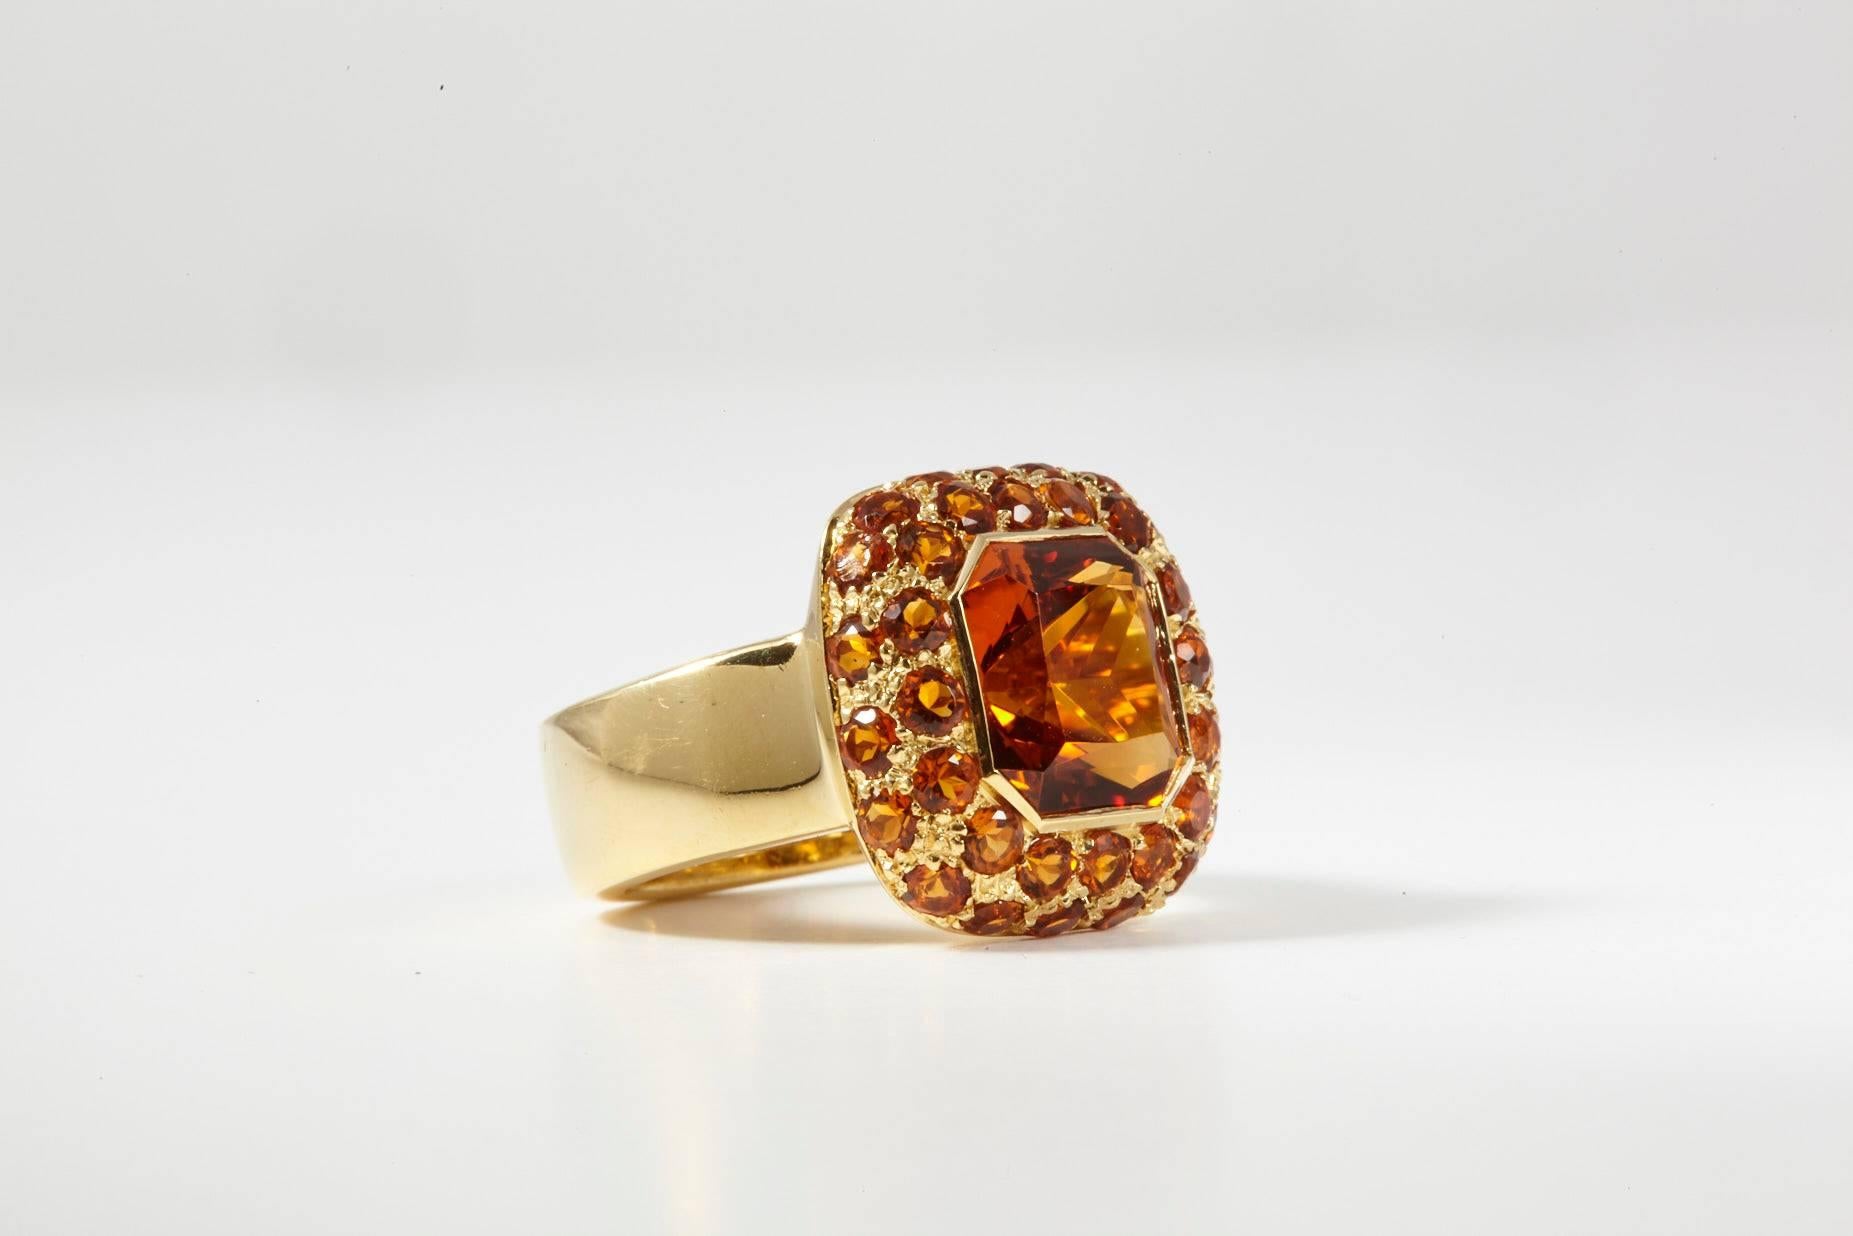 Italian Made 18 Karat Yellow Gold Citrine Cocktail Ring, featuring cushion cut center stone surrounded by two layers of 45 citrine round brilliant stones. The deep hue of the citrine orange color can't be ignored.  It's a contemporary design with a